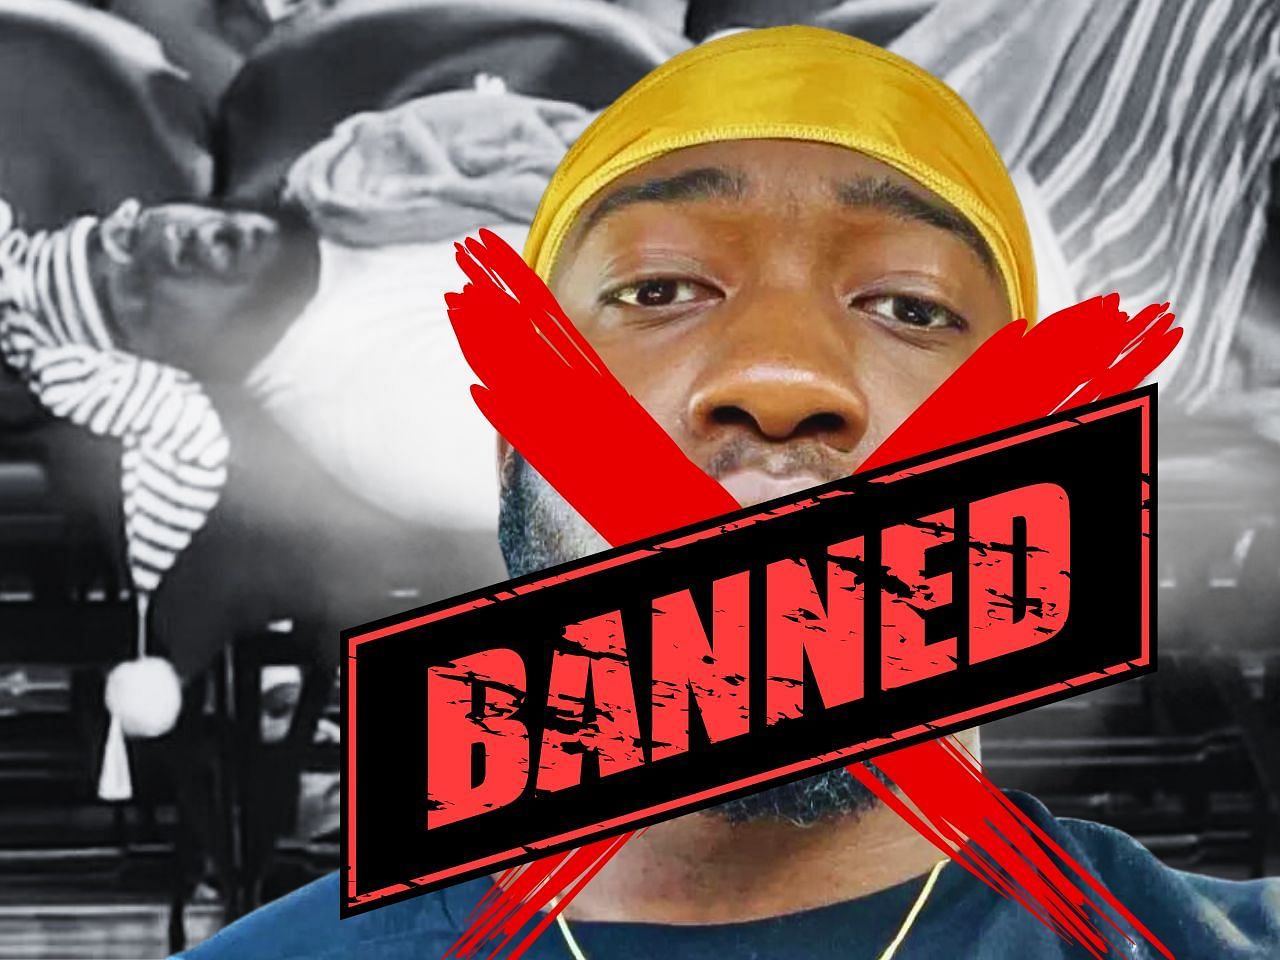 YouTuber JiDion has been banned from NBA events after his latest antics.